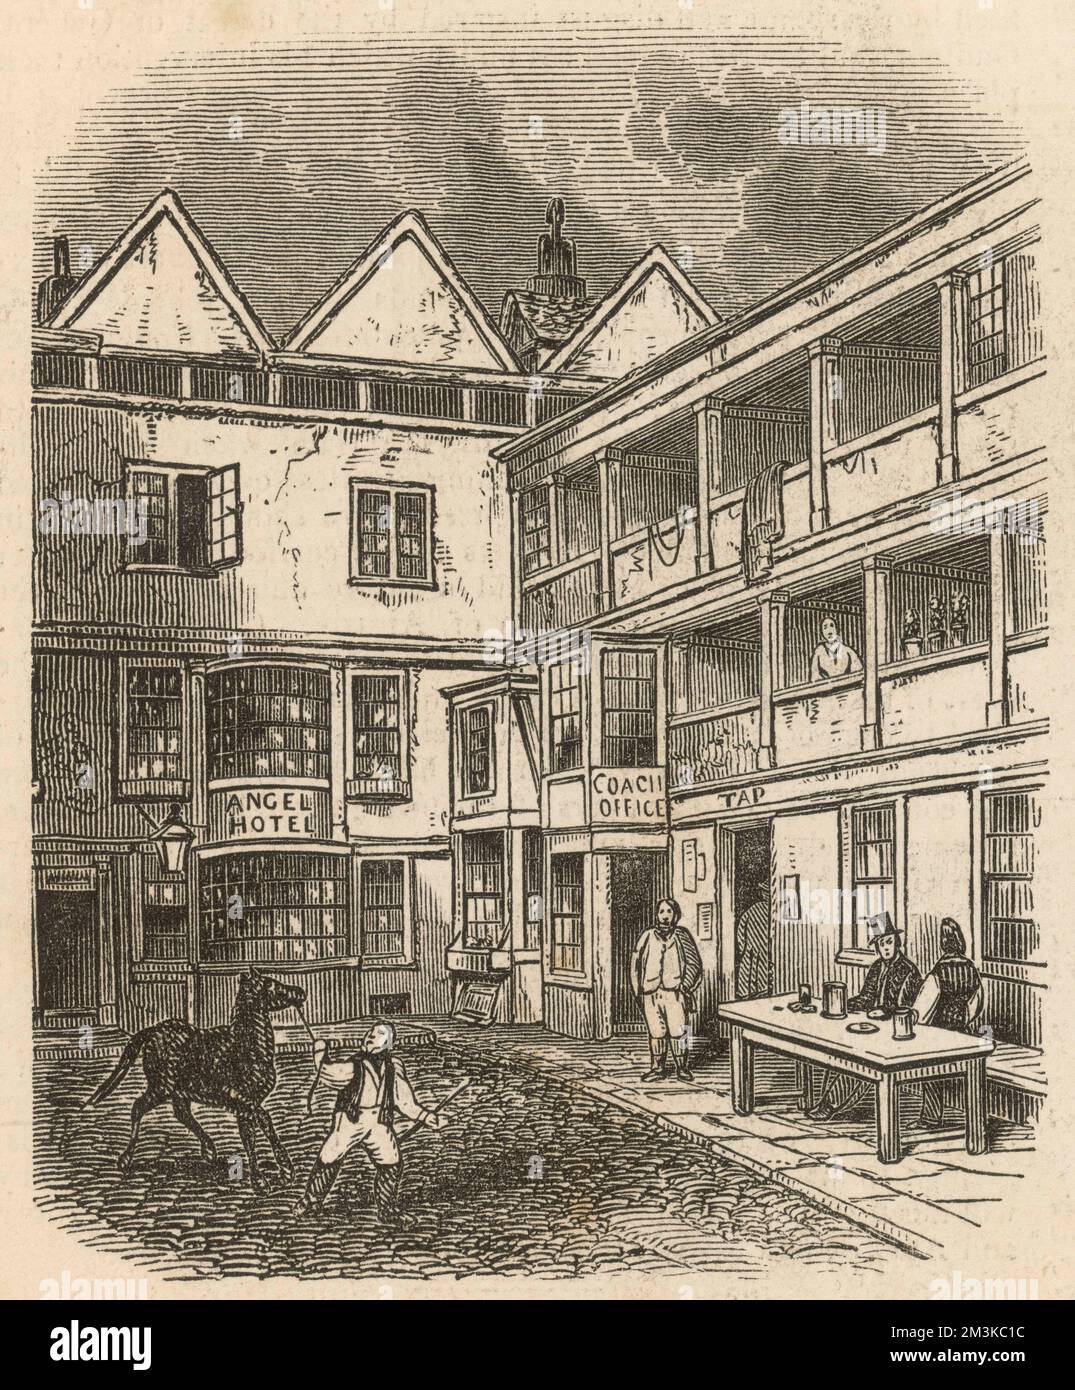 The historic public house in the parish of St Clement Dane's in the Strand, London. The Illustrated London News notes in 1849 that 'it presents a specimen of the galleried innyard,of which there are few remaining in the metropolis.'     Date: 1849 Stock Photo